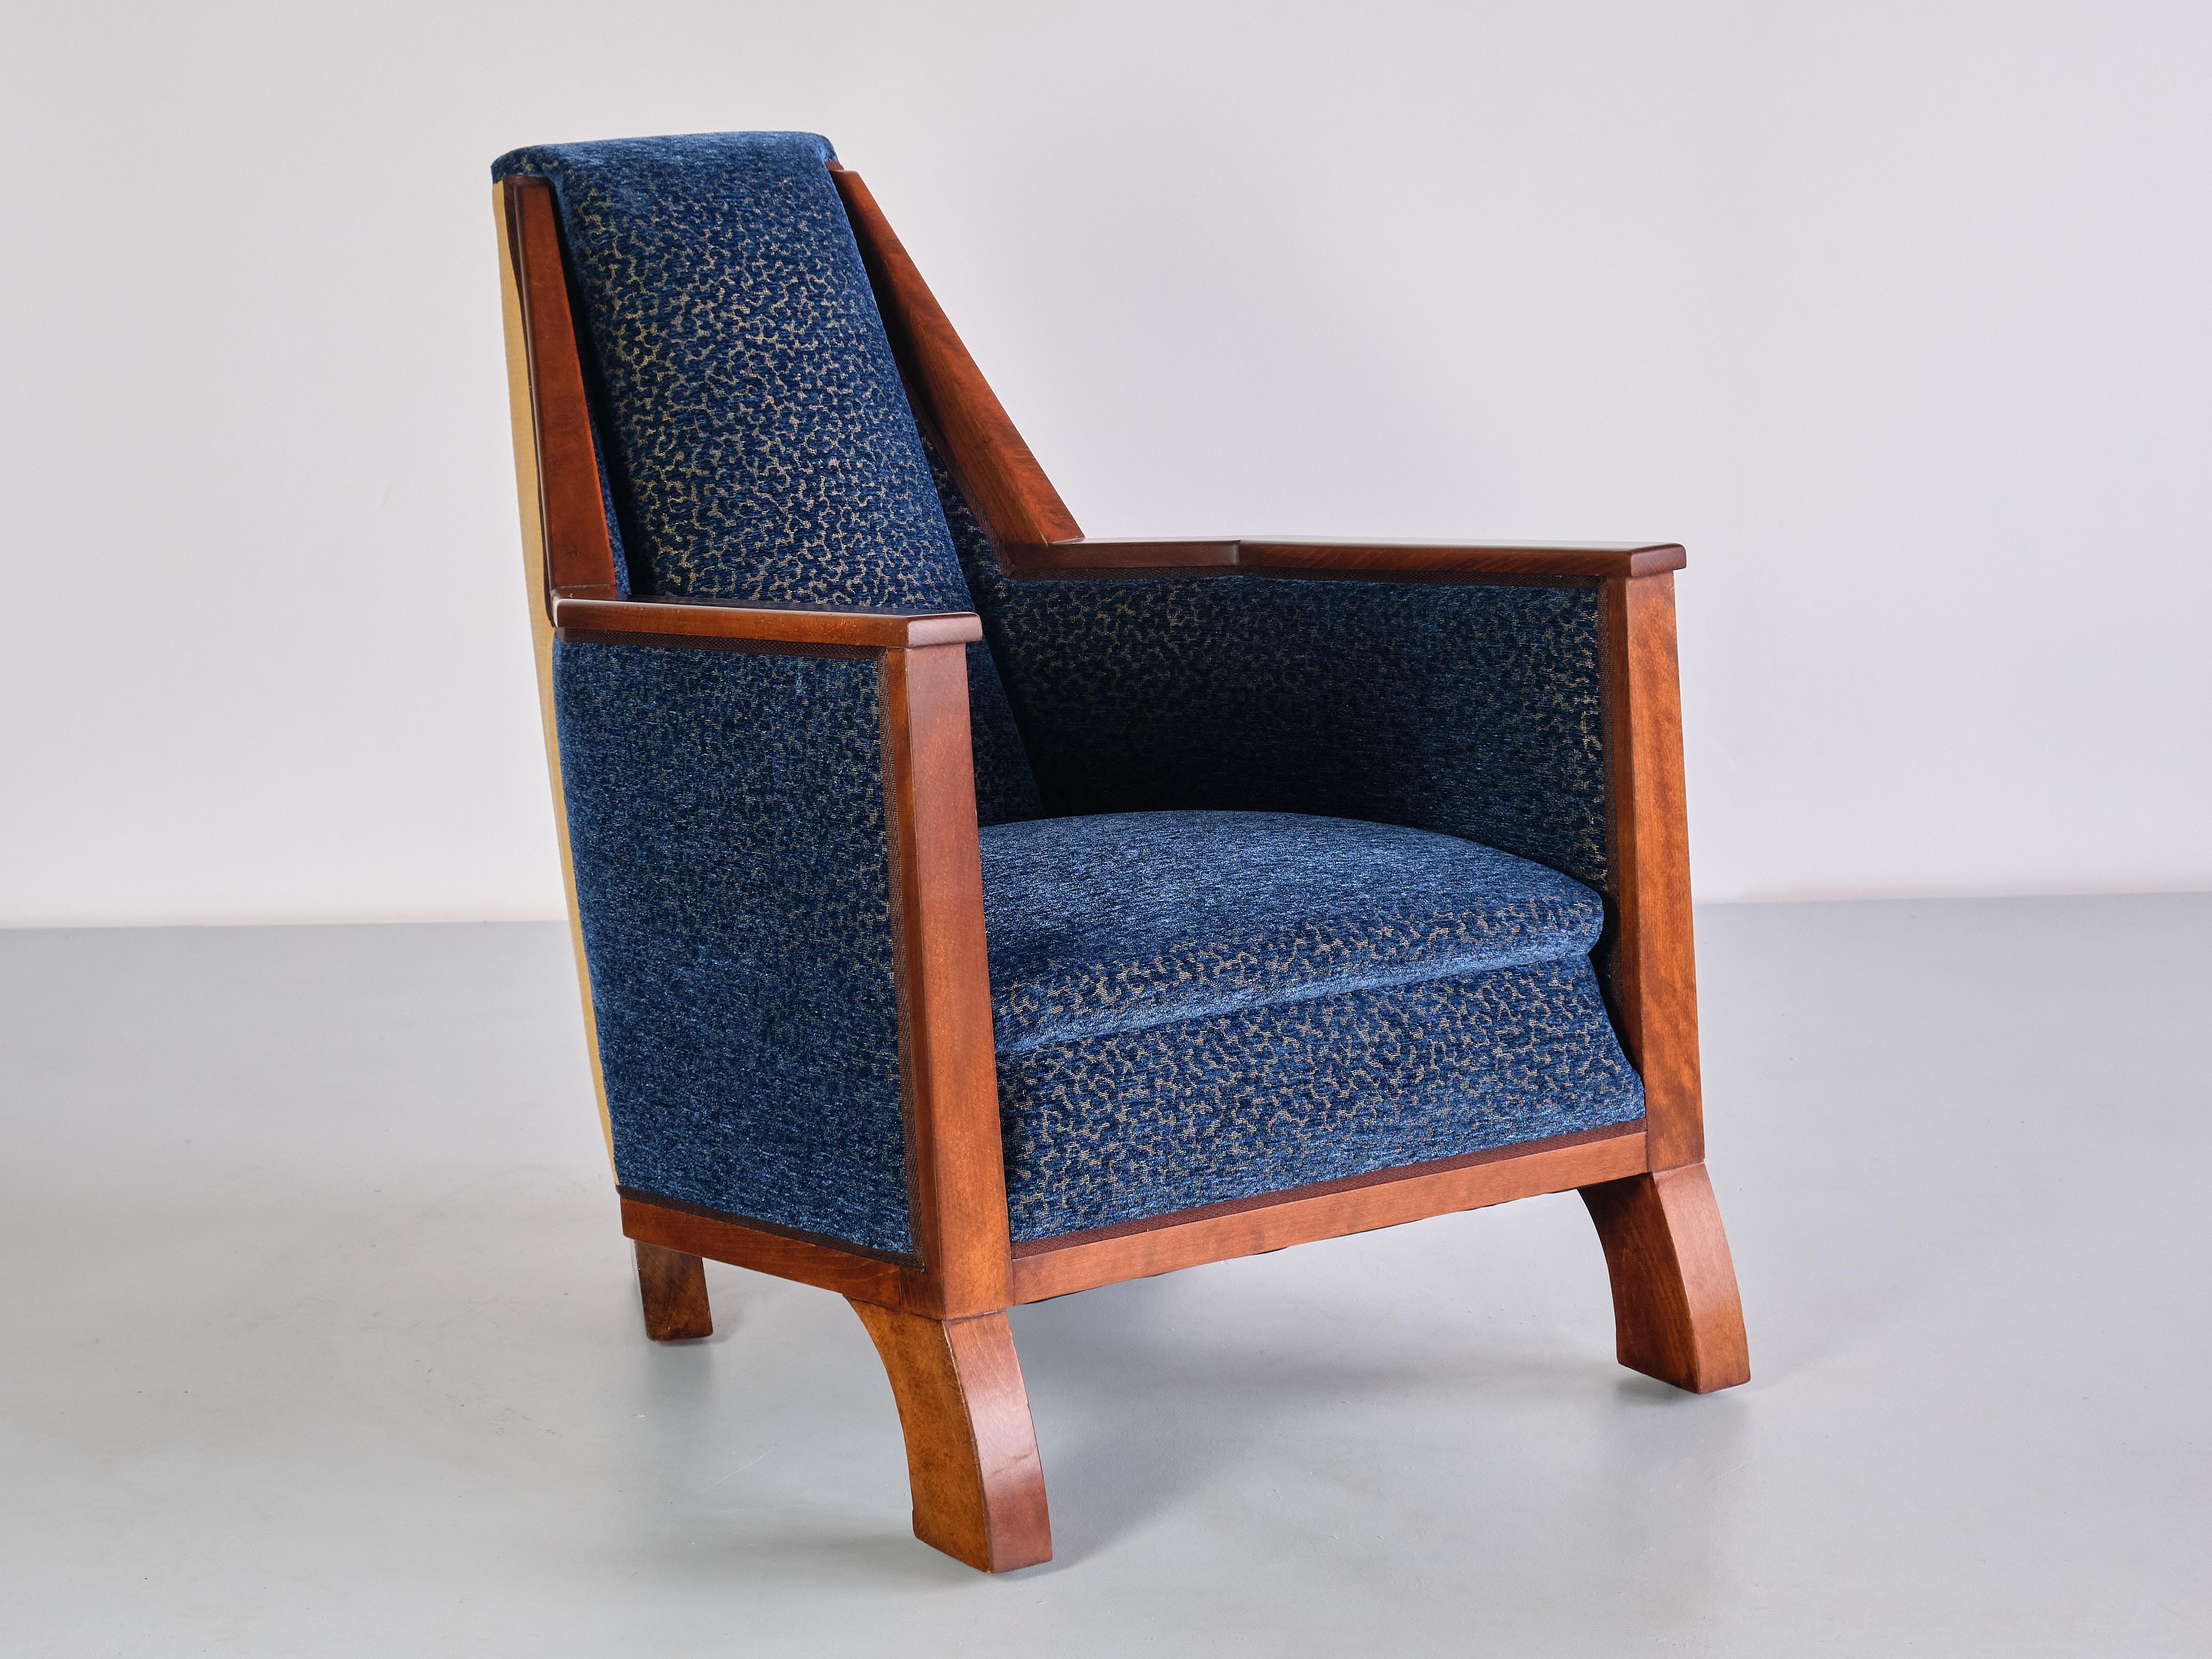 Exceptional Art Deco Arm Chair in Blue Velvet and Maple, Northern France, 1920s For Sale 1